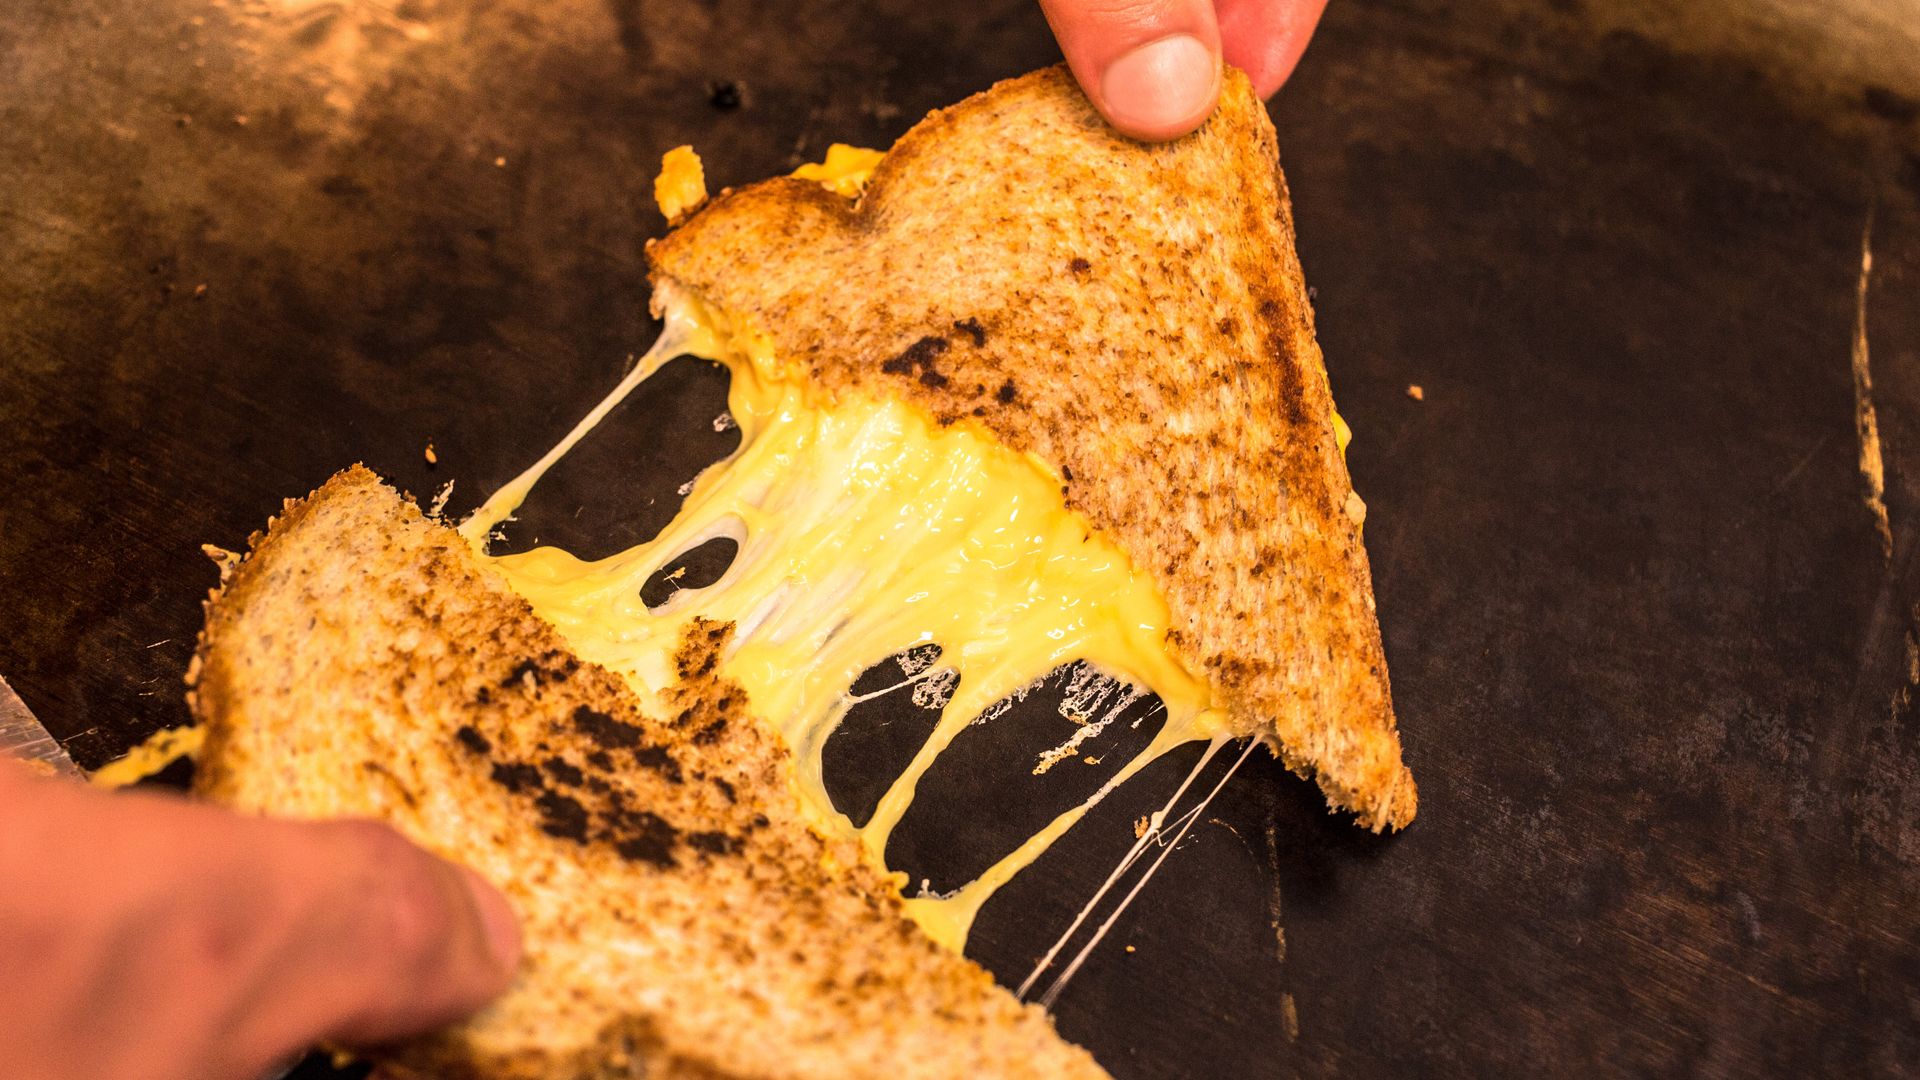 Hands pulling apart a grilled cheese sandwich